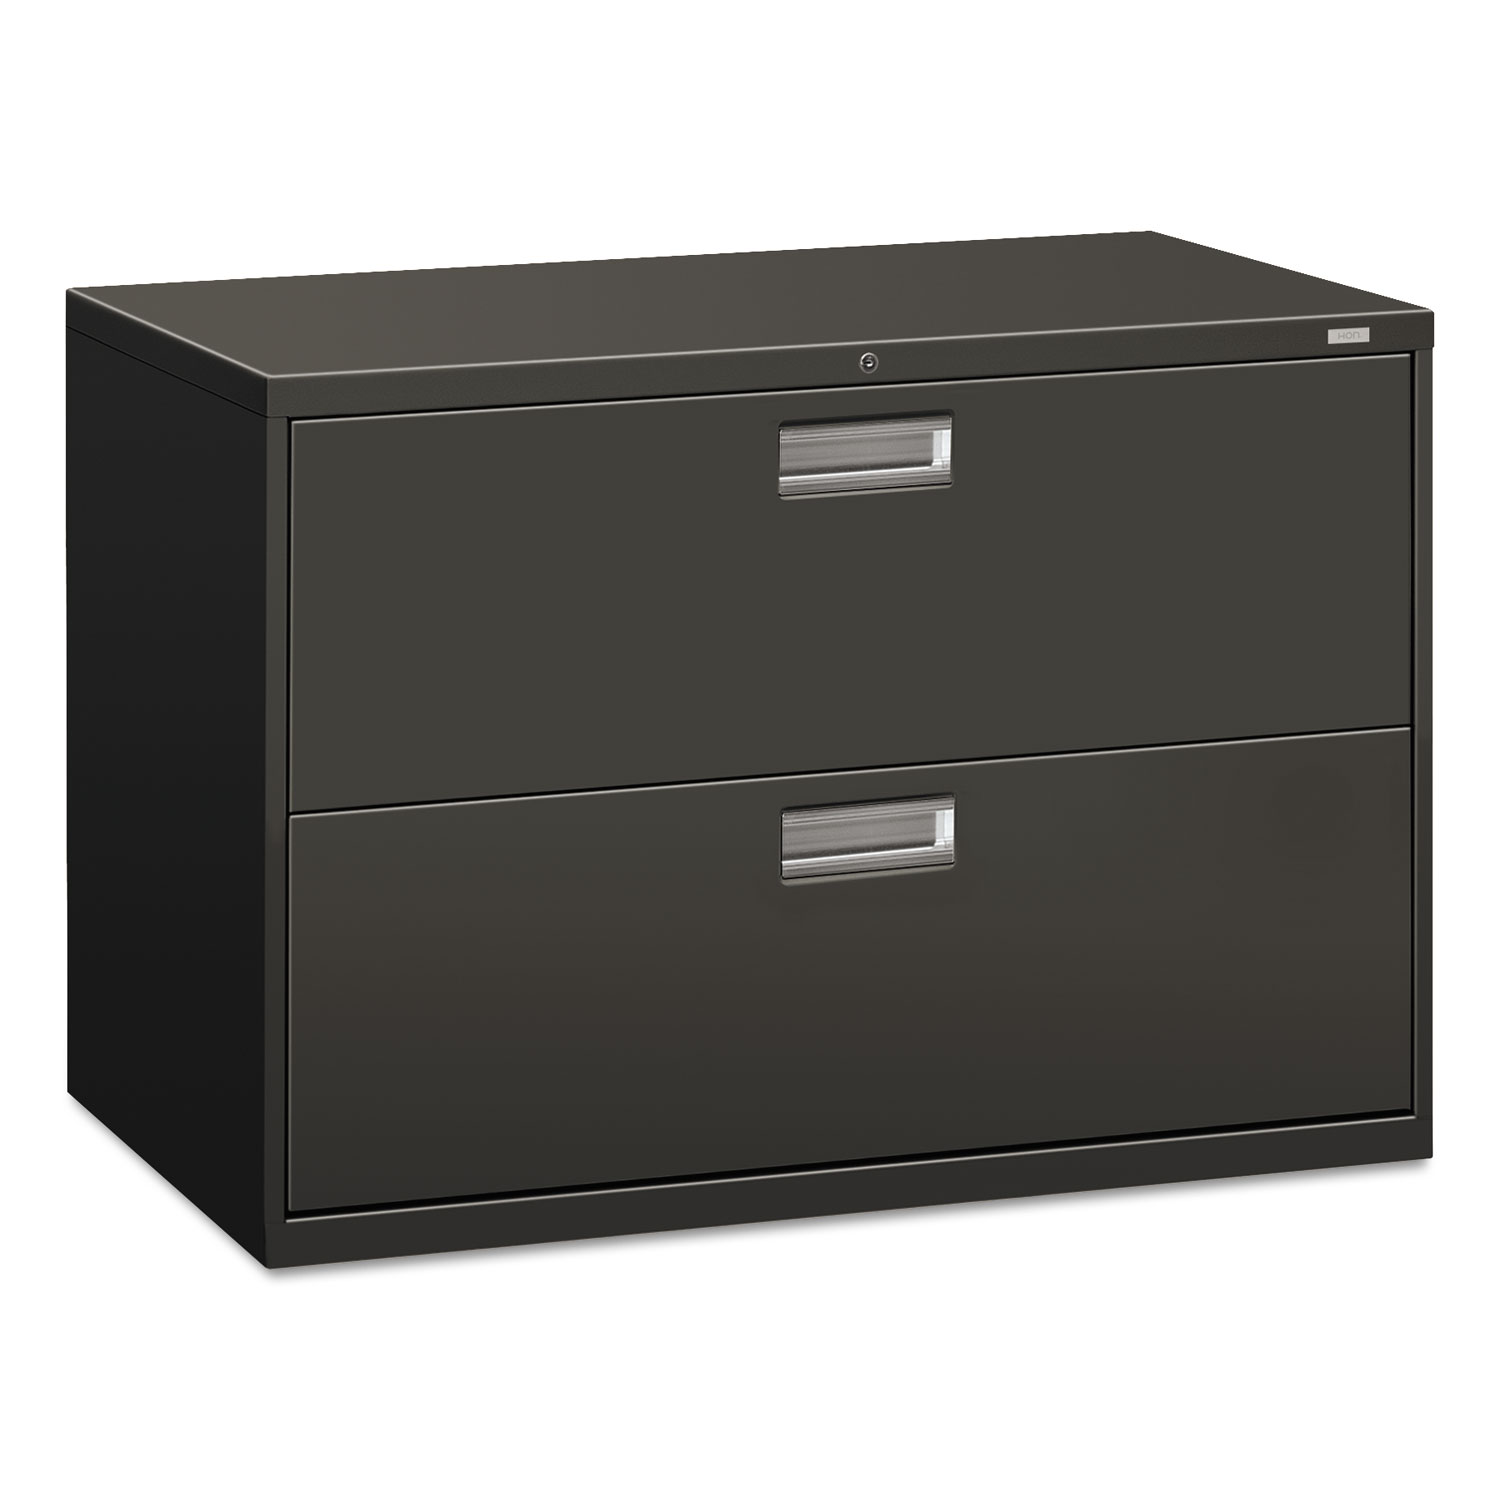 600 Series Two-Drawer Lateral File, 42w x 19-1/4d, Charcoal